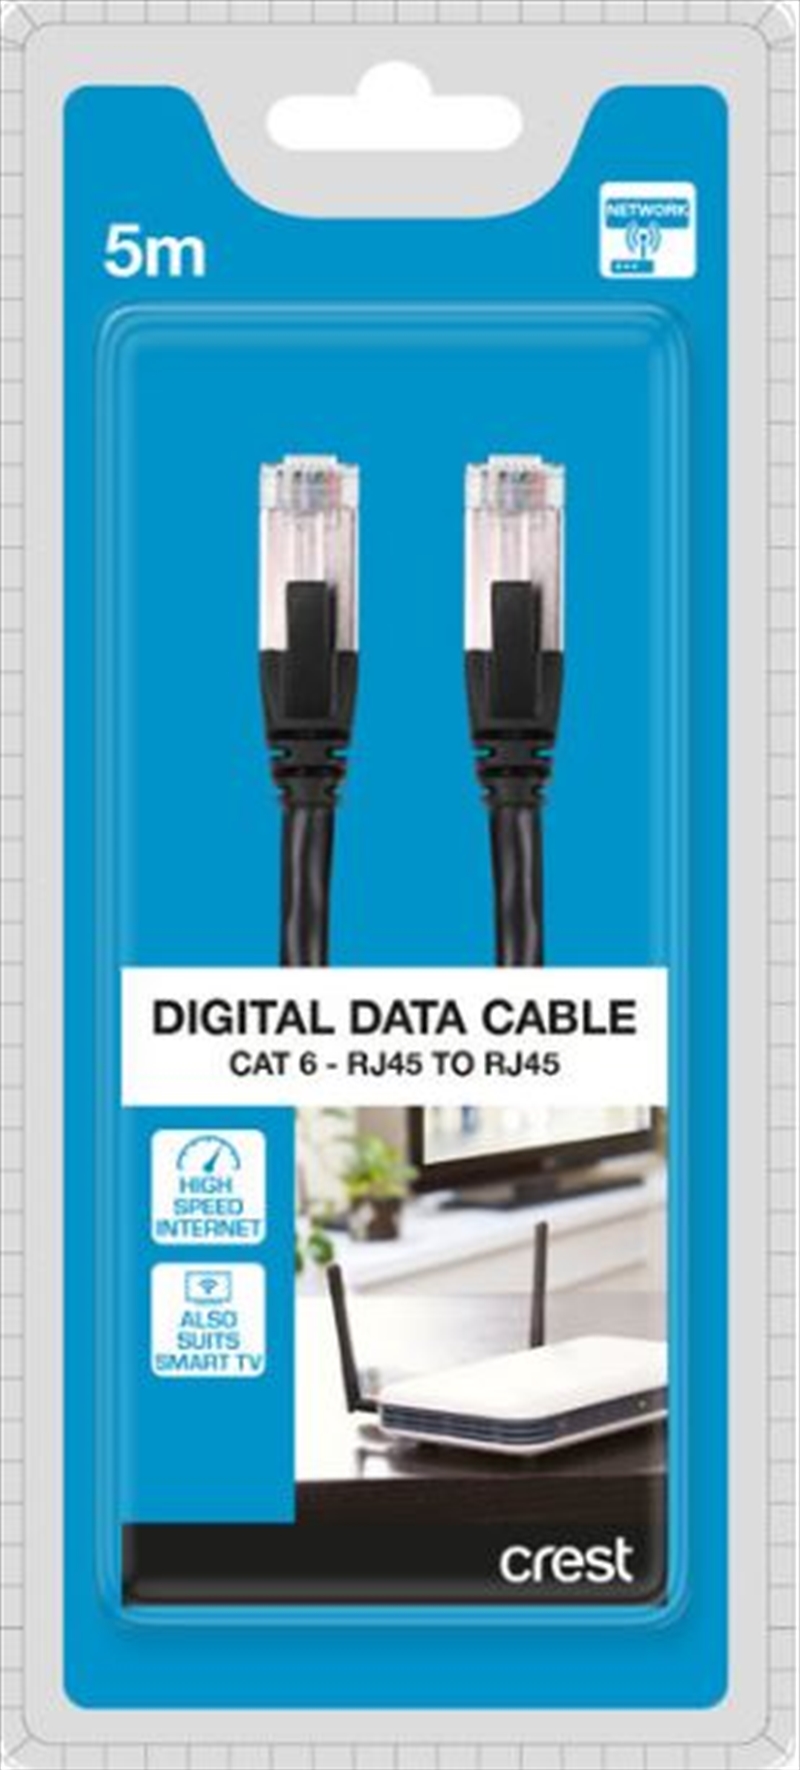 High Speed Digital Data Cable - 5M/Product Detail/Cables